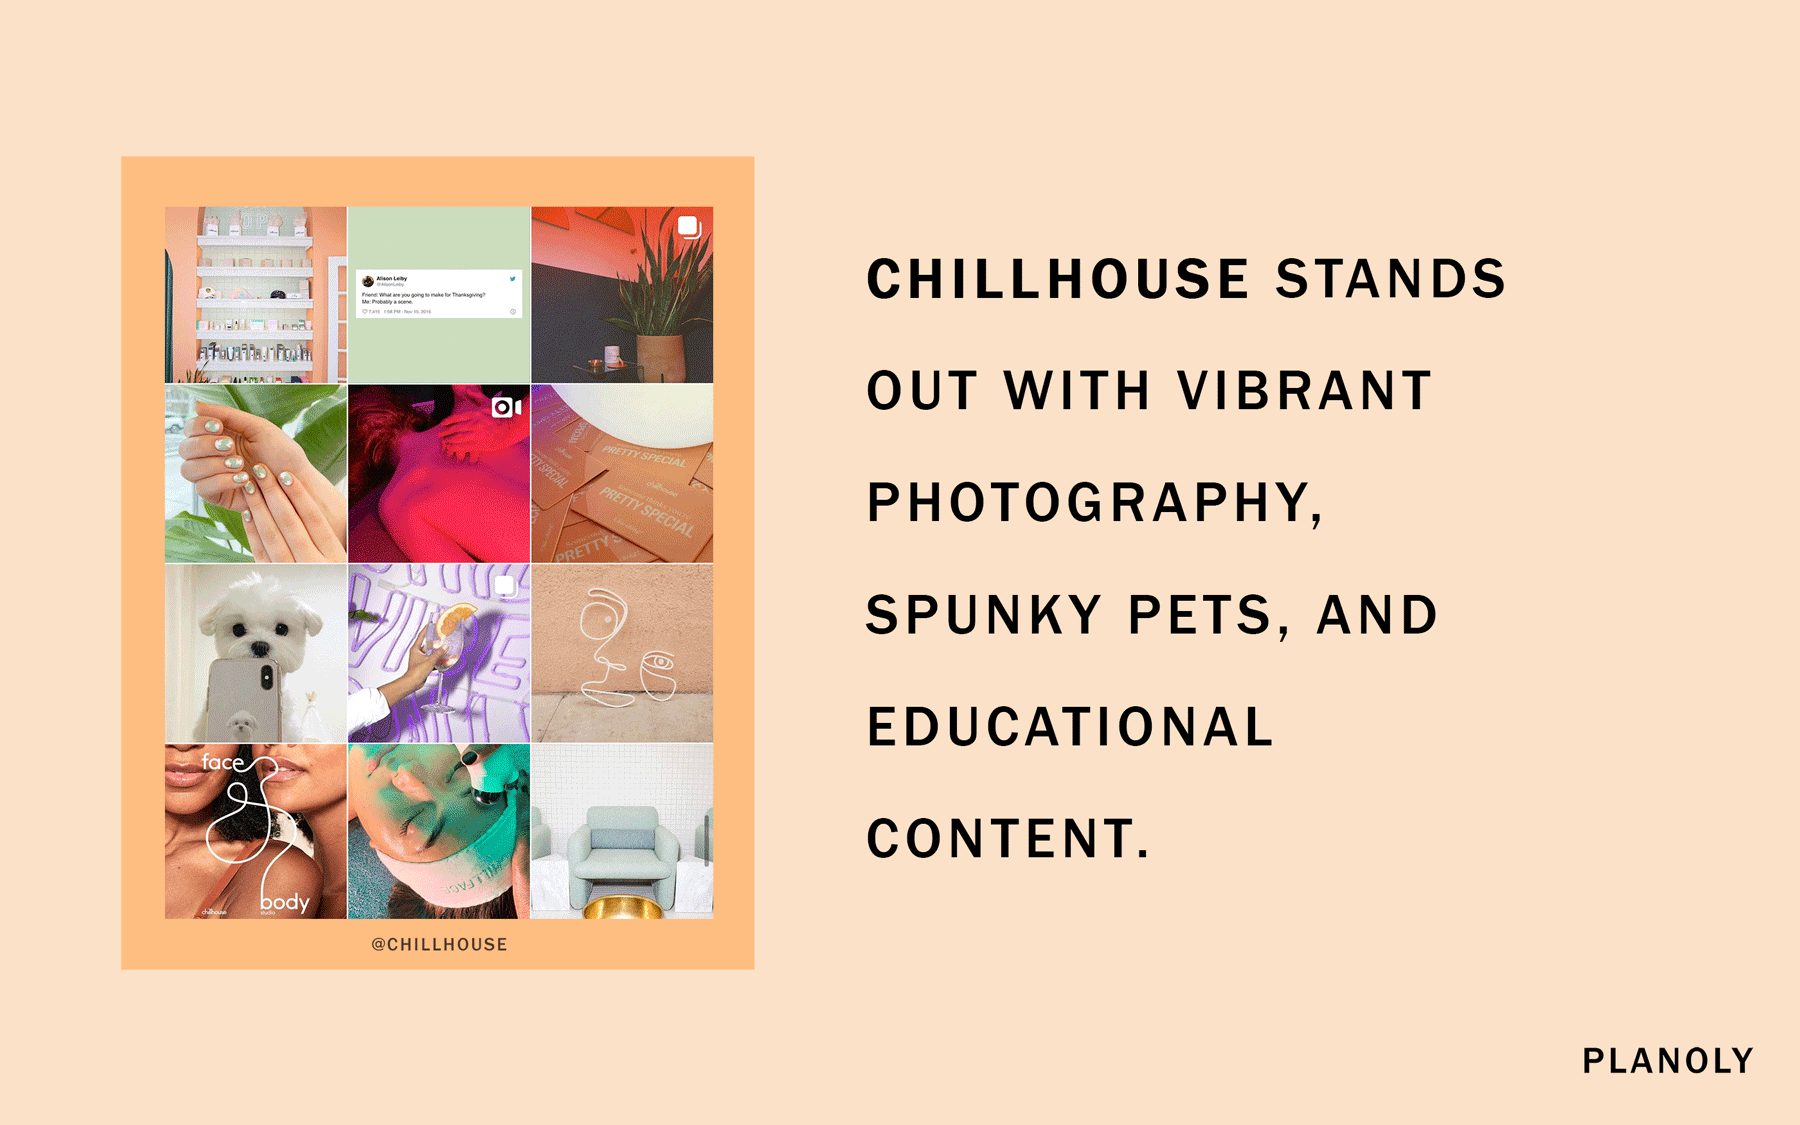 Planoly-Blog-Post-PLANOLEADERS-Chillhouse-Image-2--2